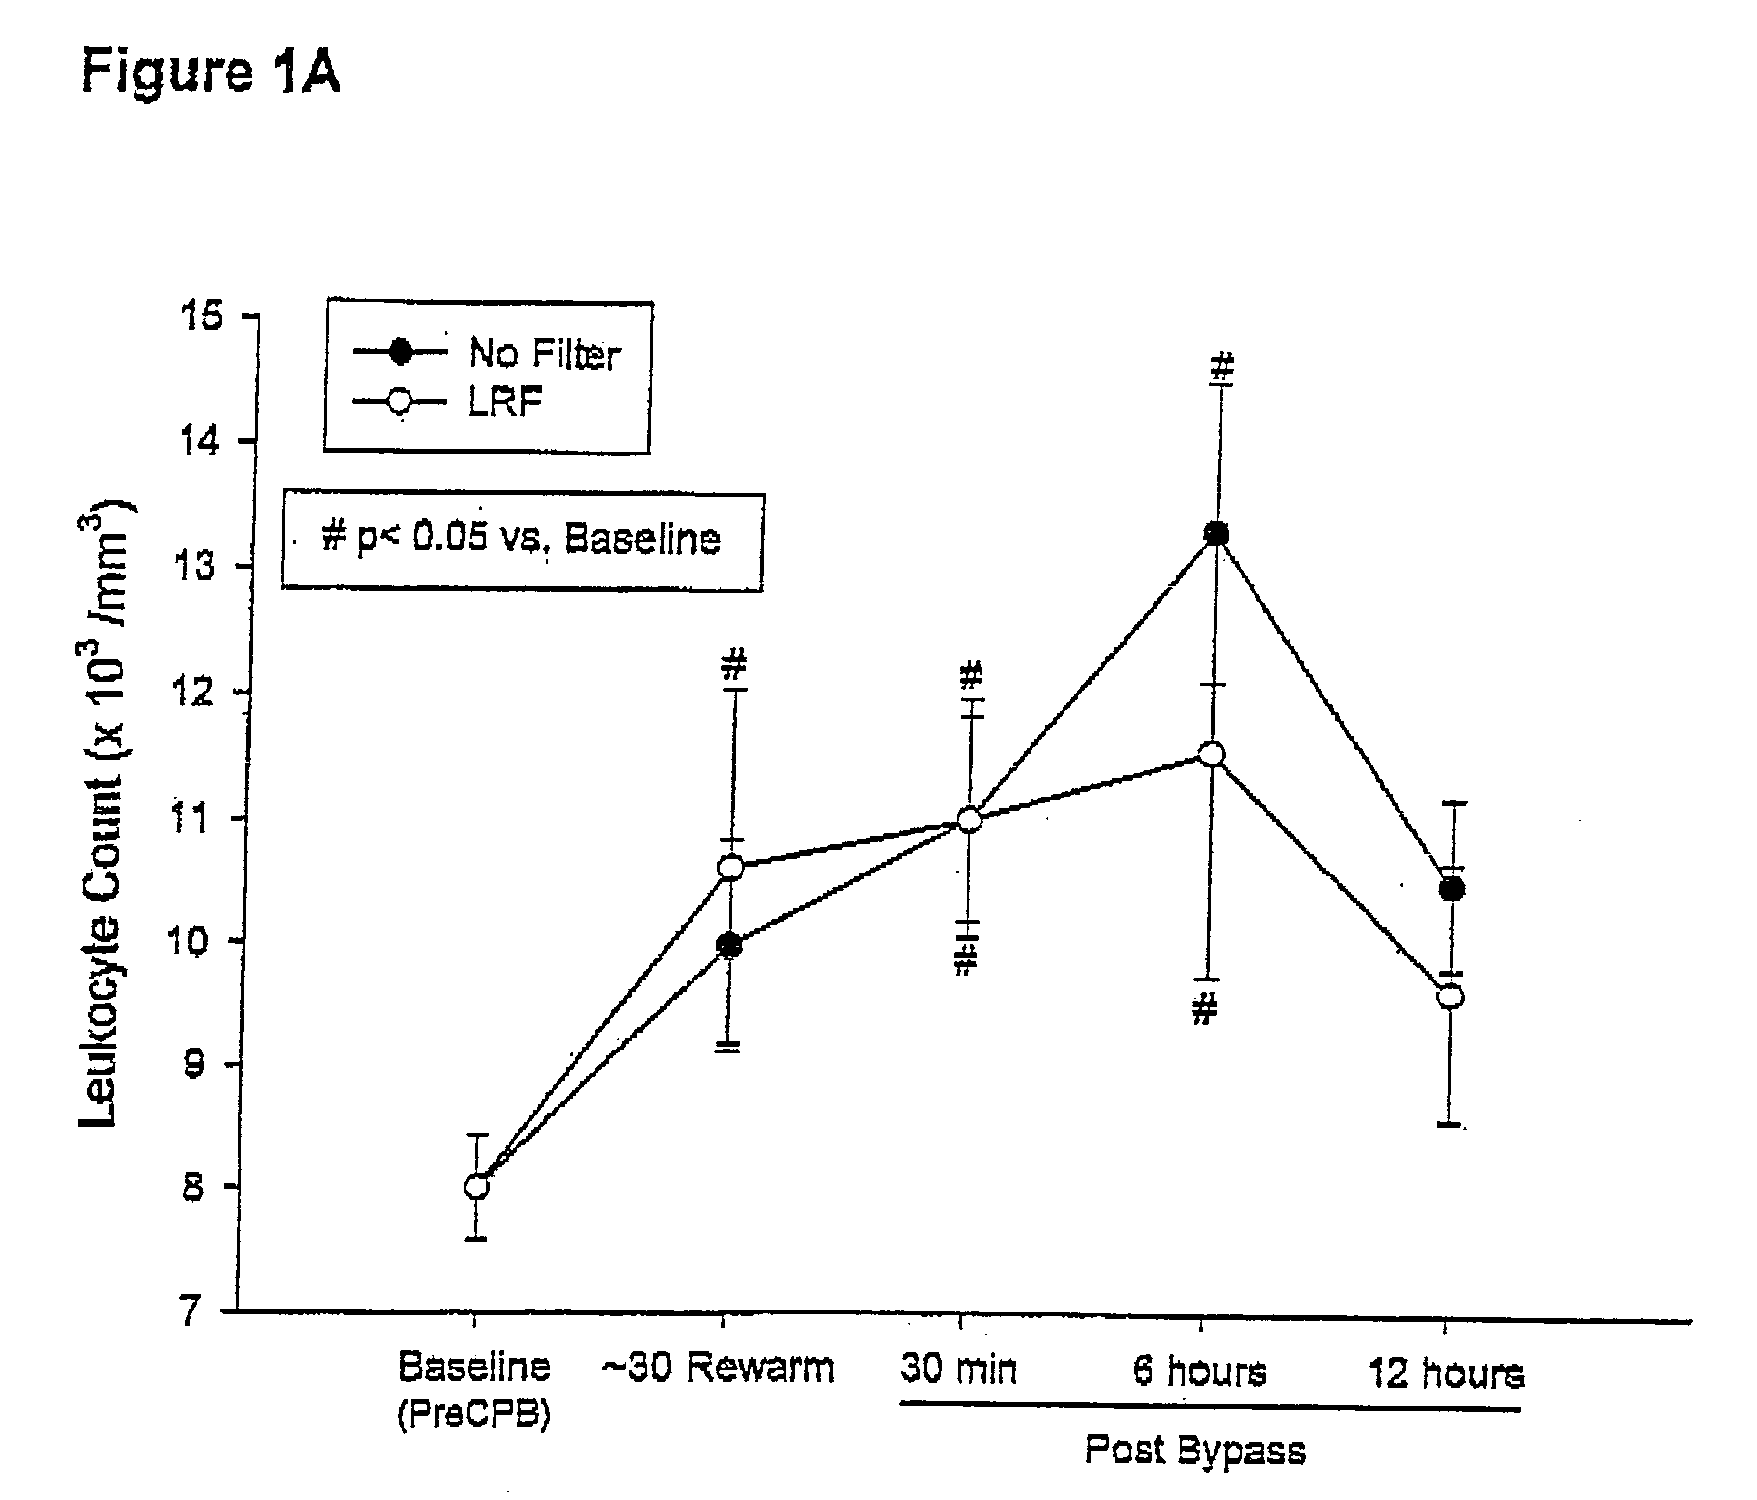 System and method for filtering leukocytes in cardiac surgery